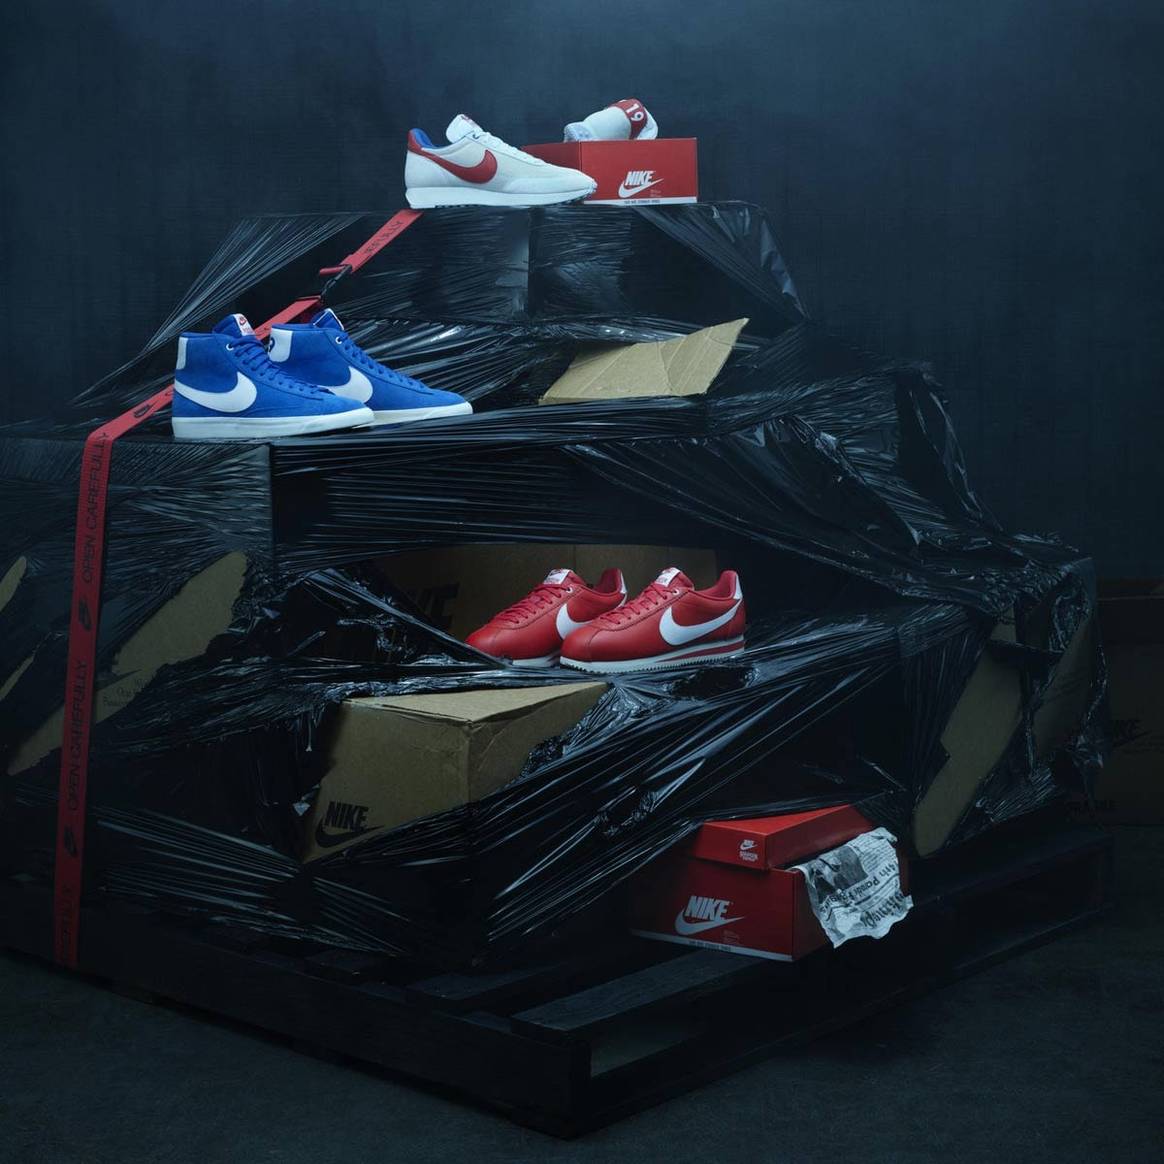 In pictures: Nike to launch Stranger Things collection